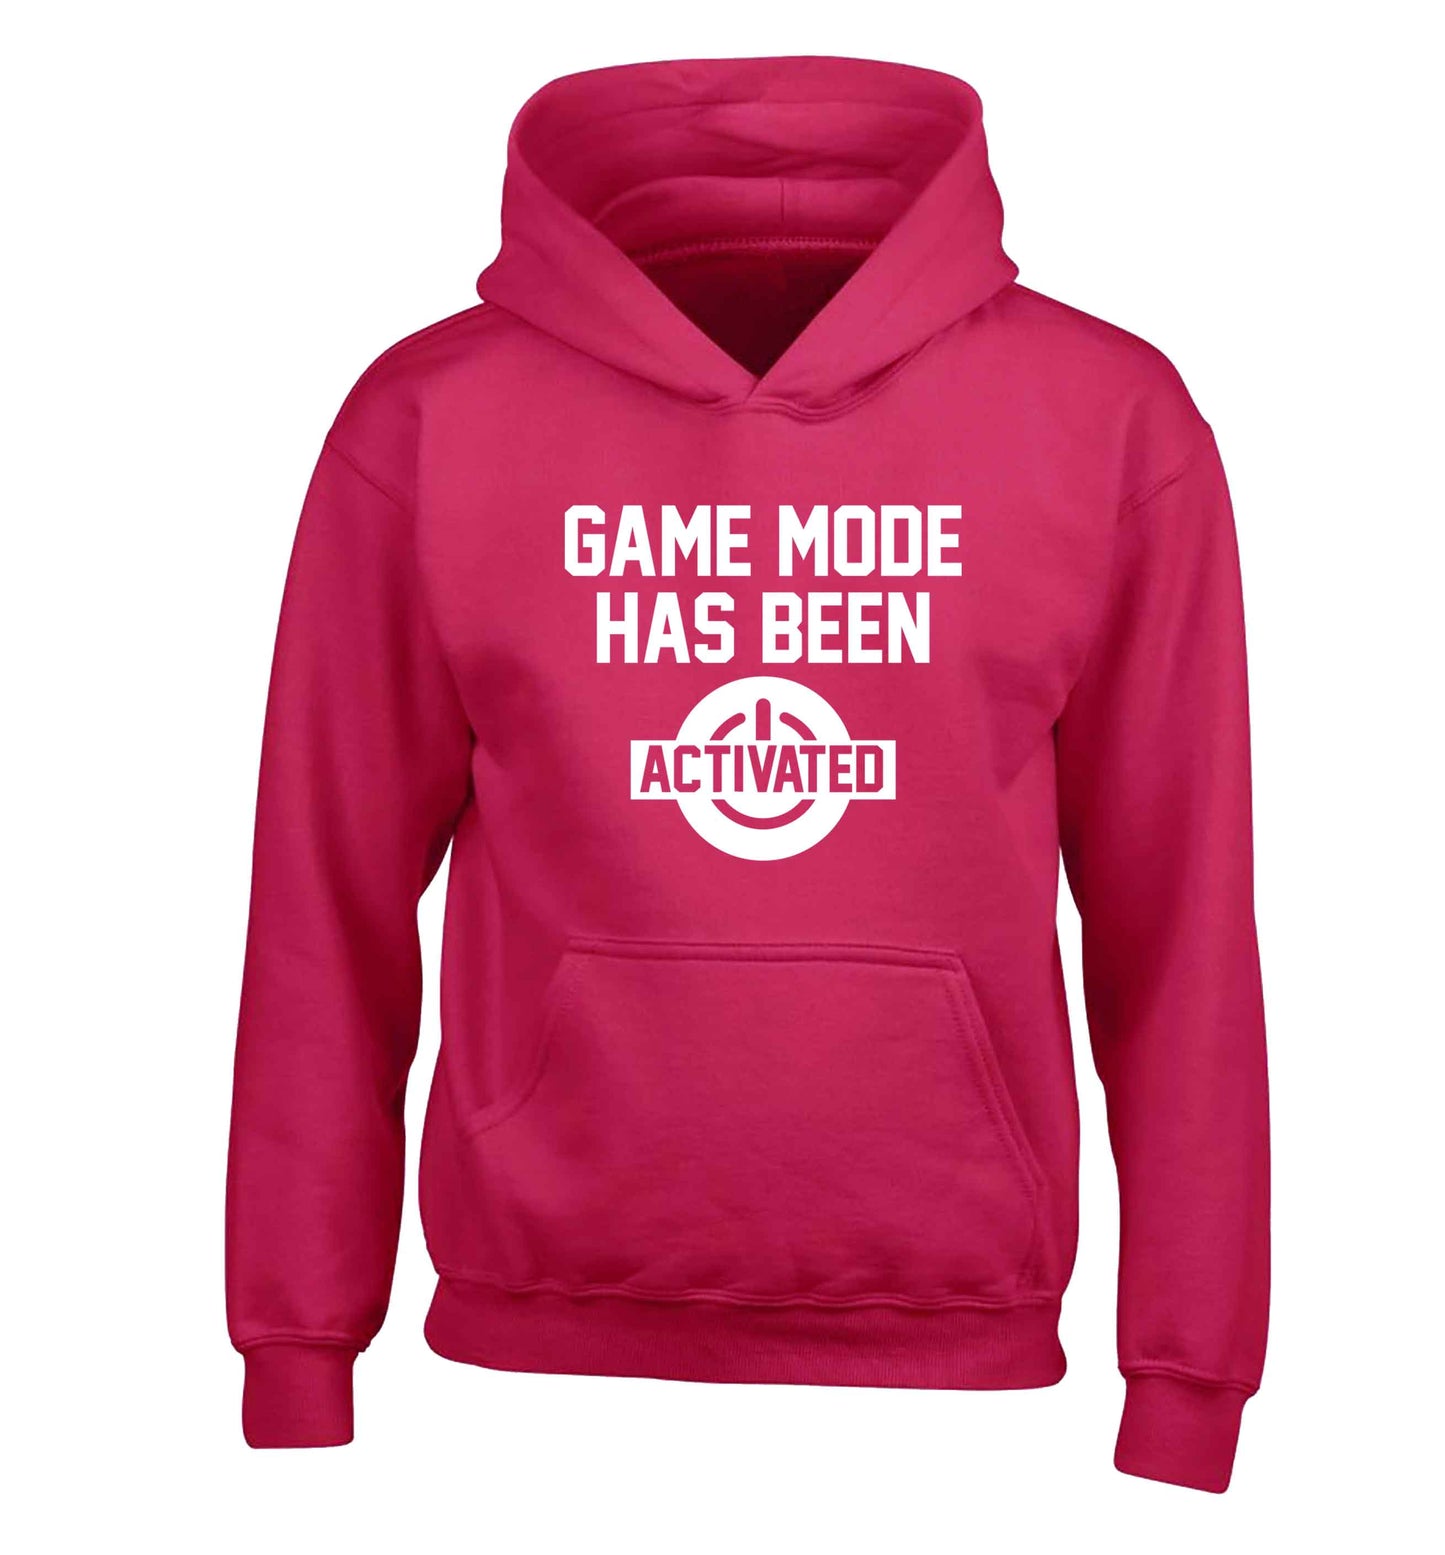 Game mode has been activated children's pink hoodie 12-13 Years